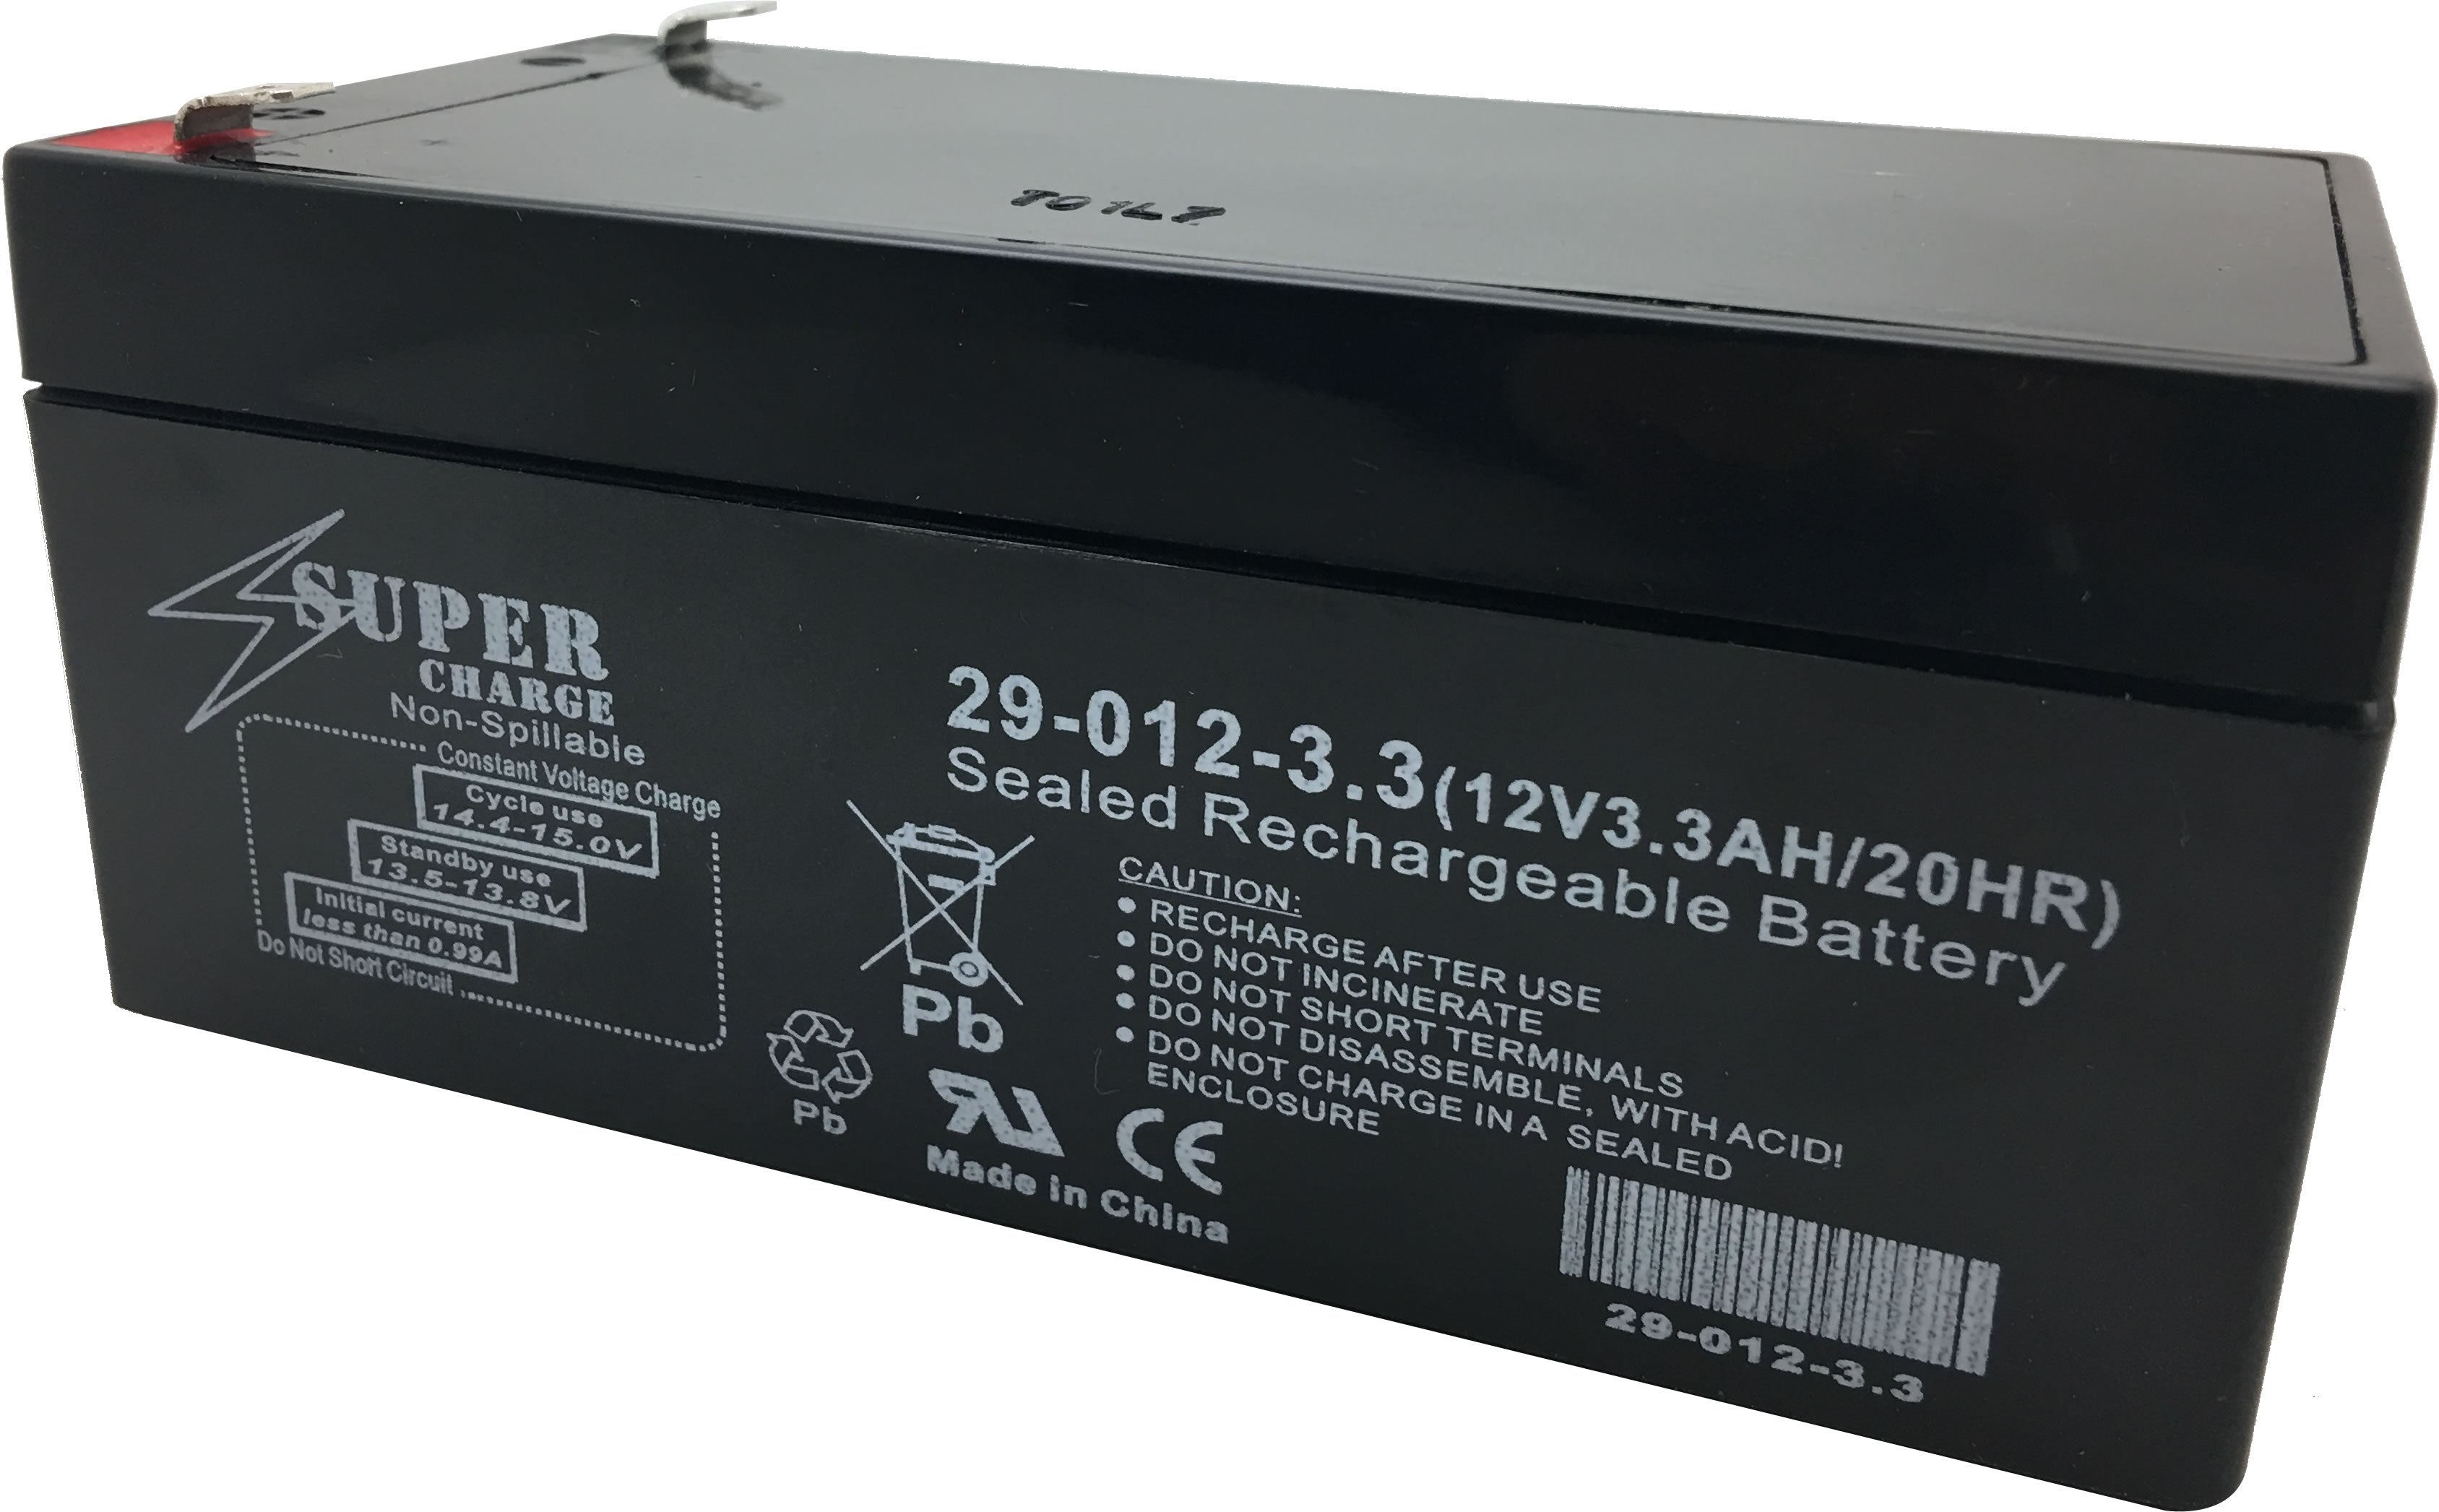 29-012-3.3 Rechargeable Battery 12V 3.3AH 20HR